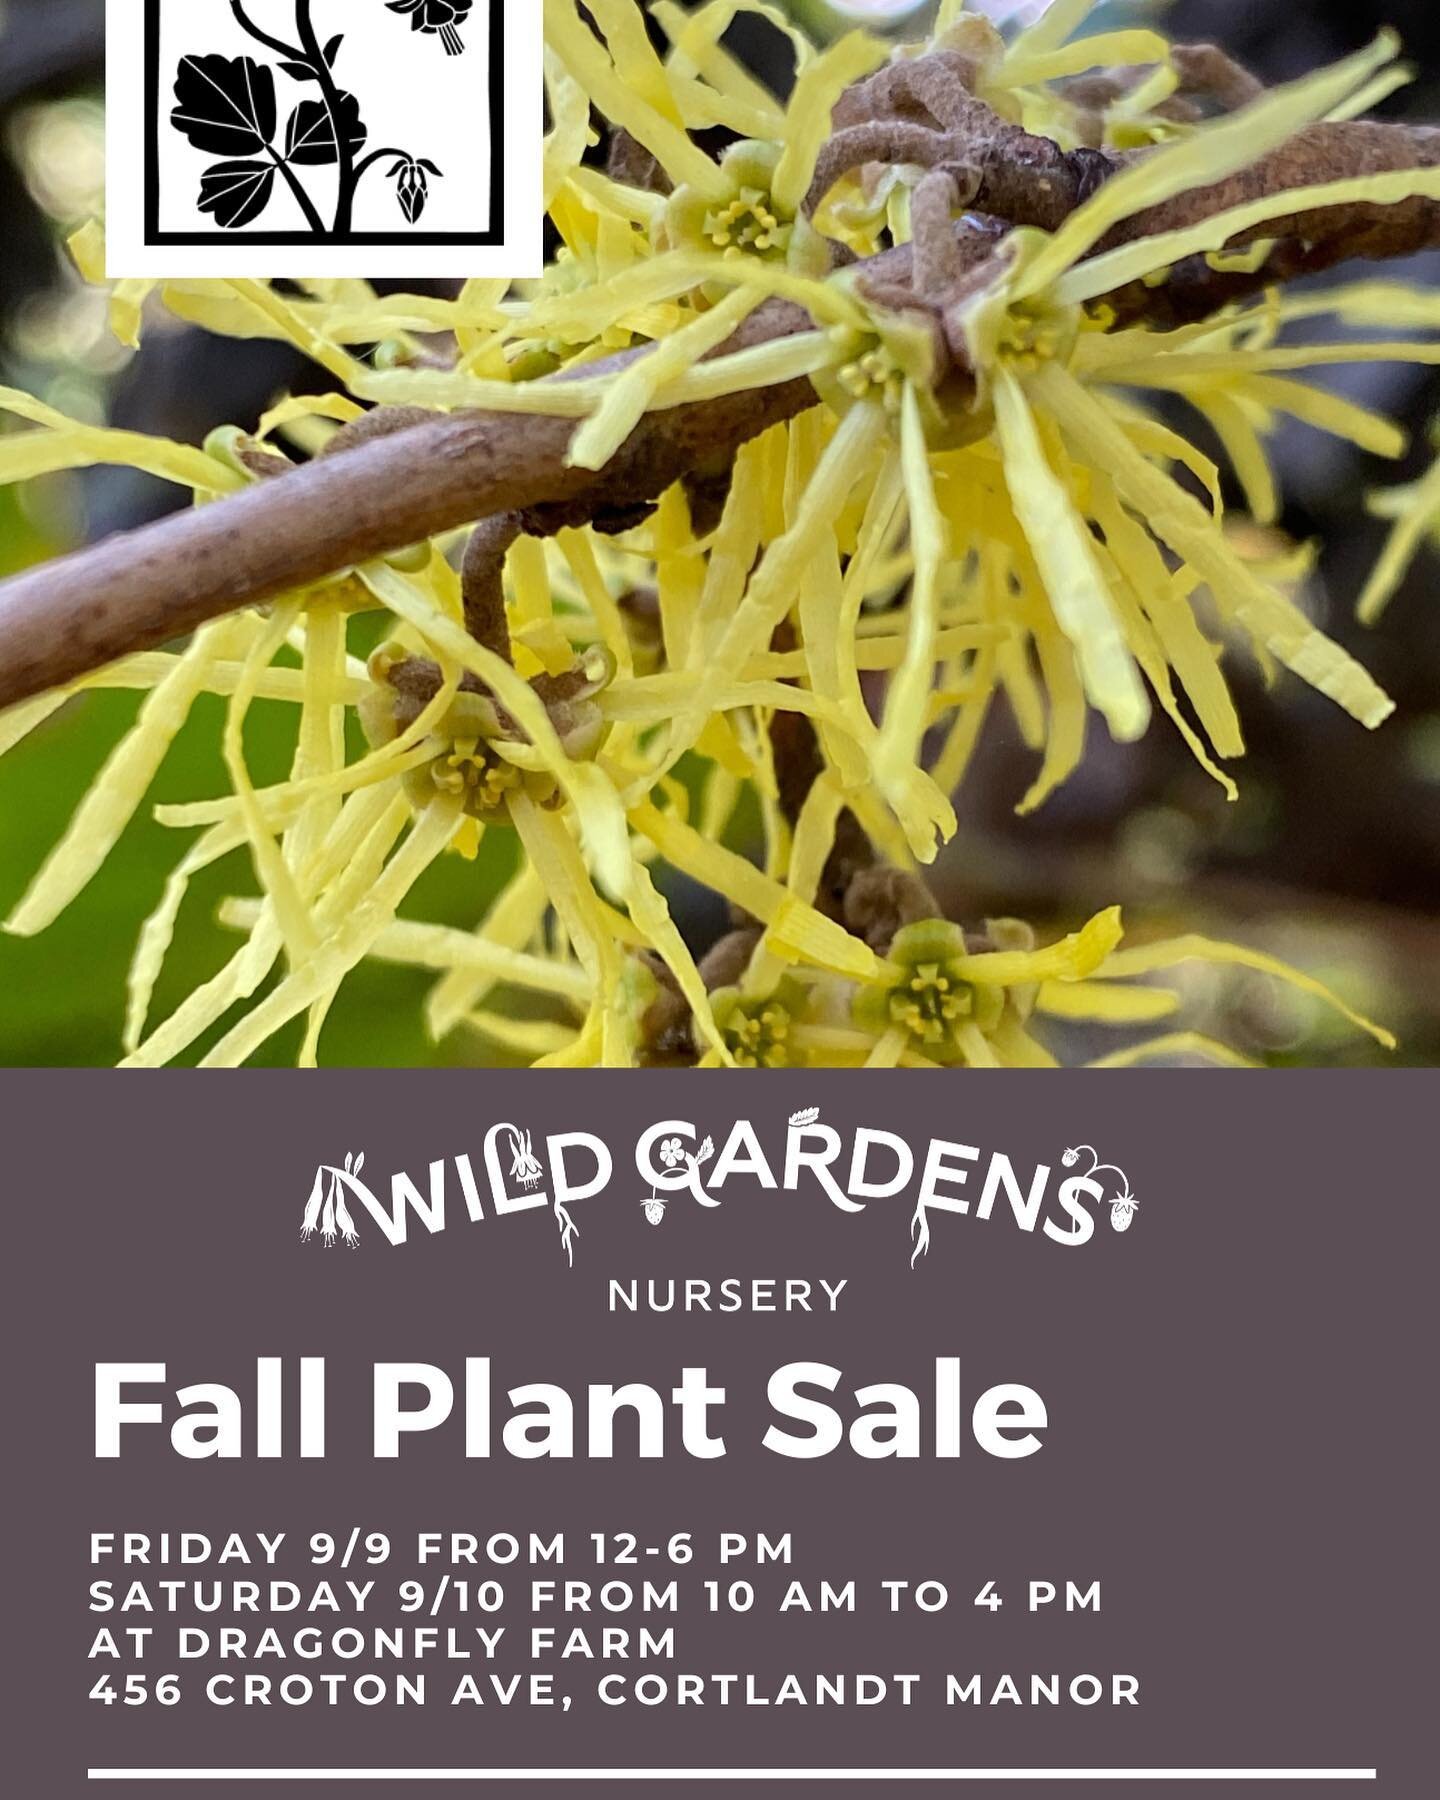 Mark your calendar! We will kick off the fall season with a two day in-person sale. #nativeplants #wildgardens